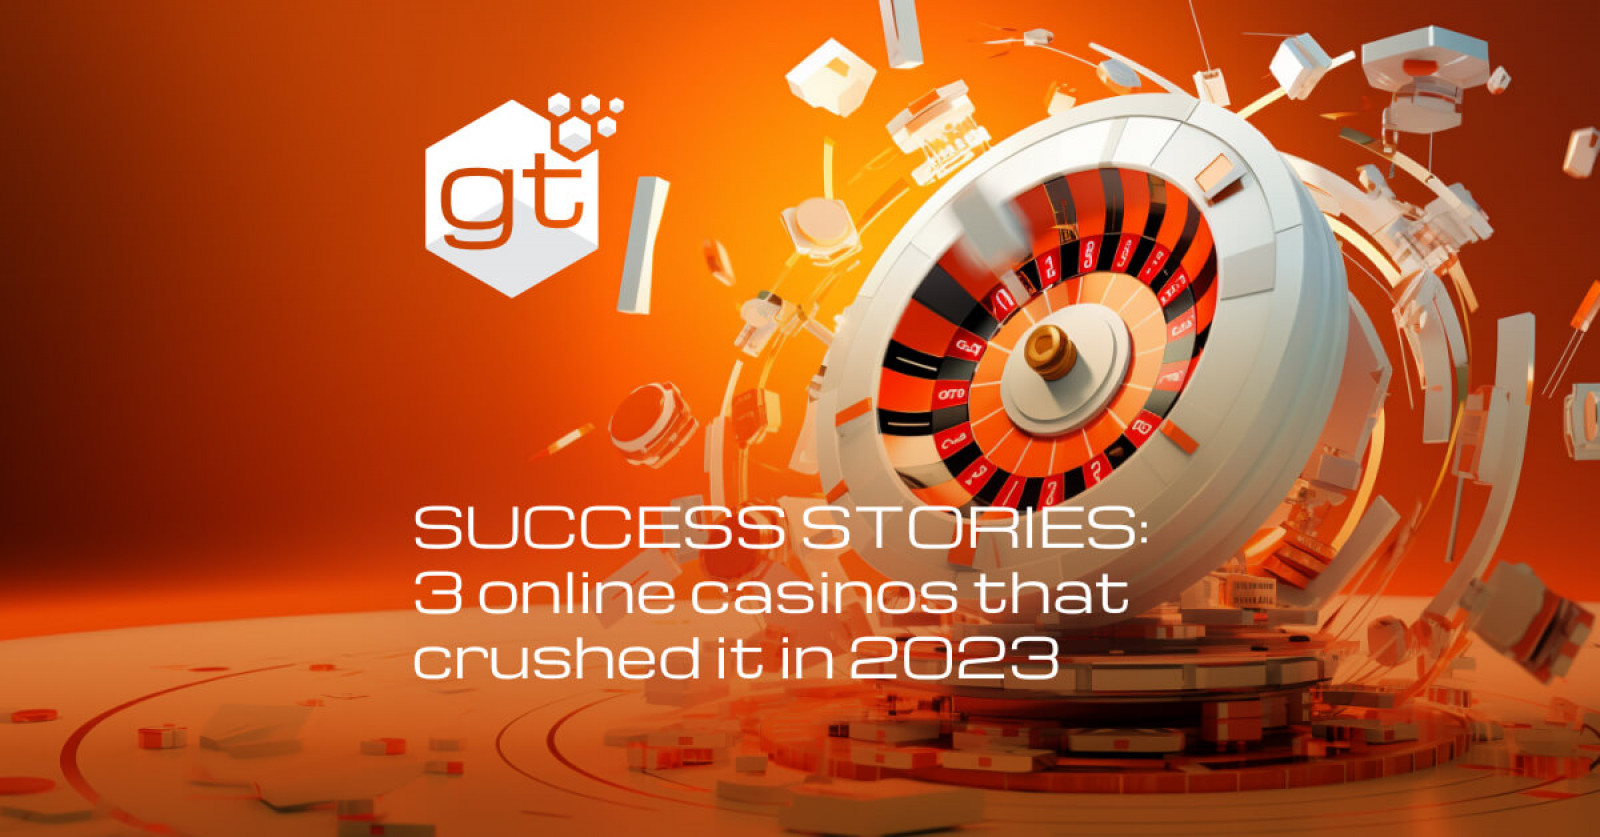 Success stories: 3 online casinos with great success in 2023